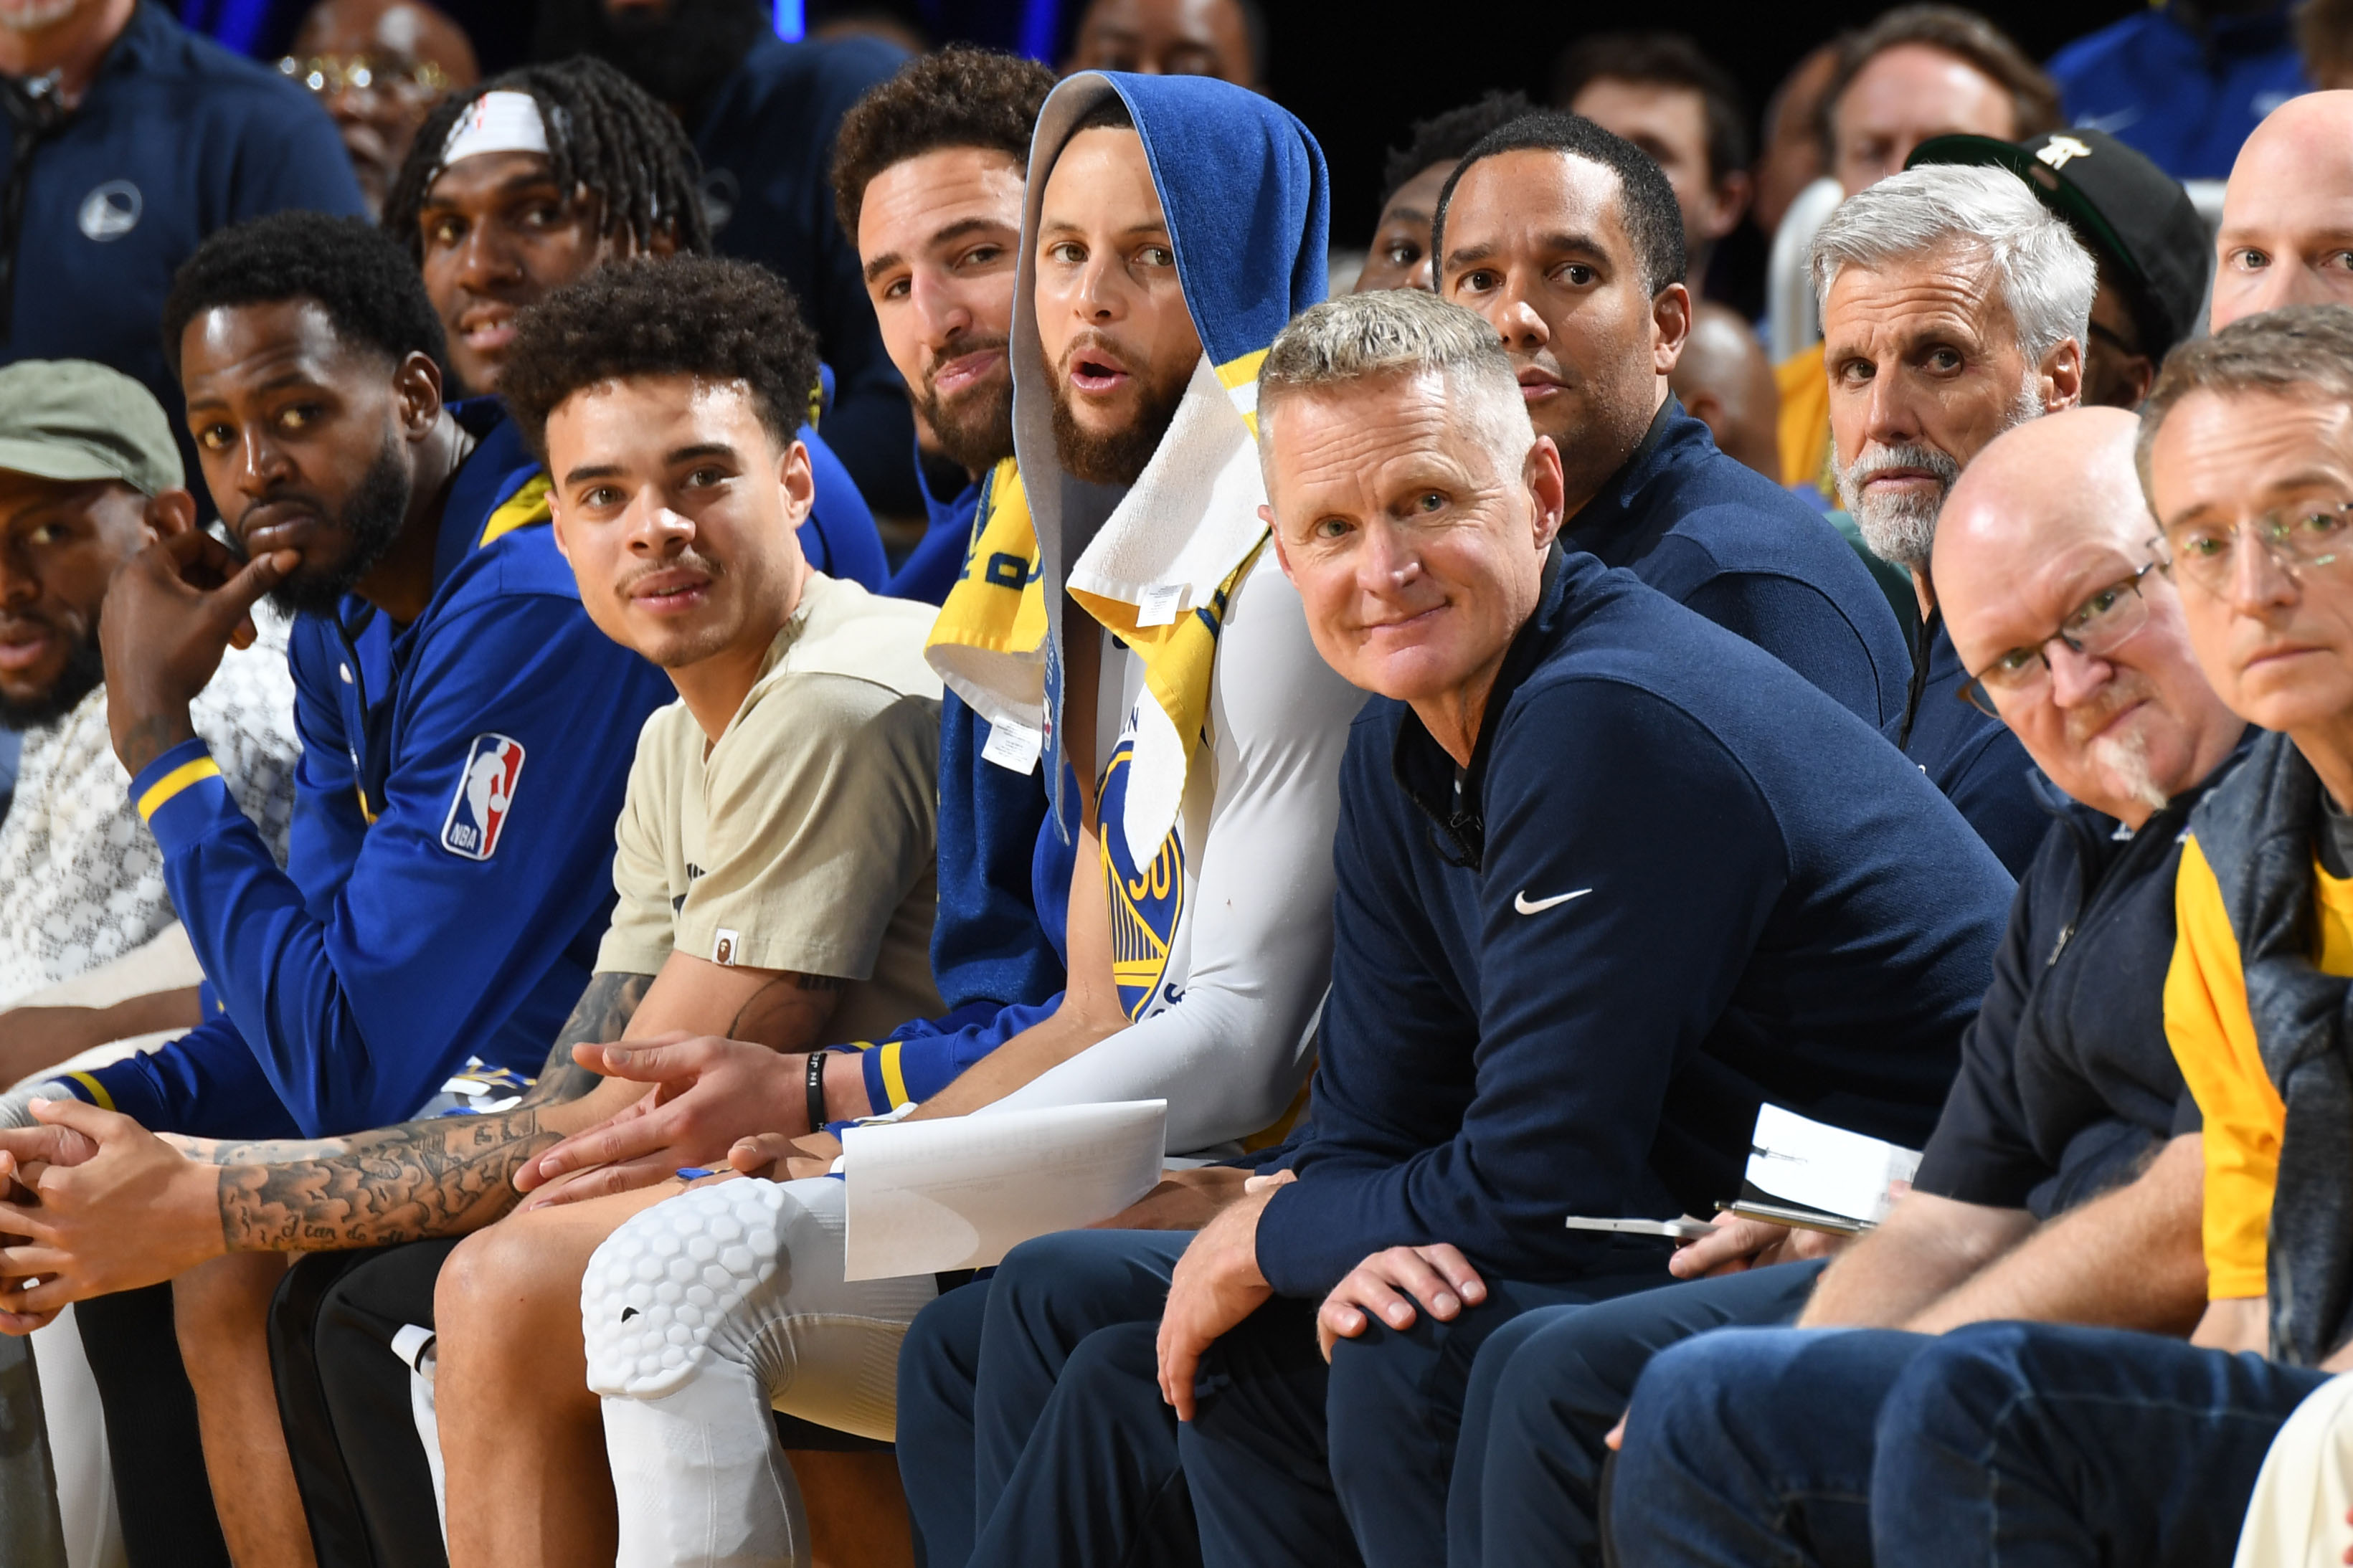 Steve Kerr and Steph Curry sitting next to each other on the bench